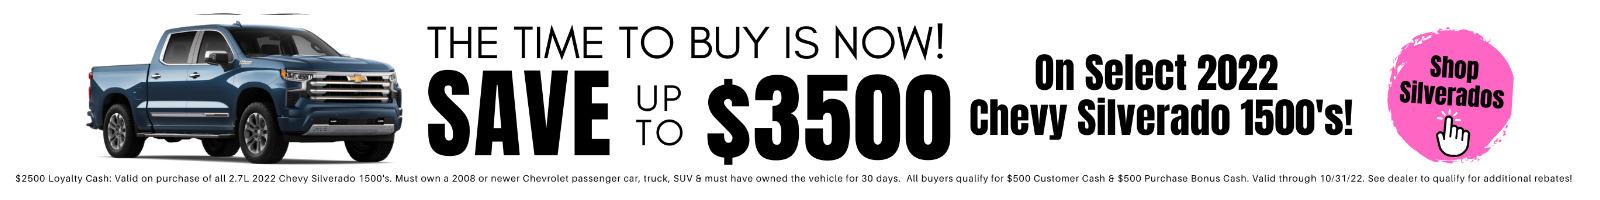 The time to buy is now! Save up to $3,500 on select 2022 Chevy Silverado 1500's!
$2,500 Loyalty Cash: Valid on purchase of all 2.7L 2022 Chevy Silverado 1500's. Must own a 2008 or newer Chevrolet passenger, car, truck, SUV & must have owned the vehicle for 30 days. All buyers qualify for $500 Customer Cash & $500 Purchase Bonus Cash.Valid Through 10/31/22. See Dealer to Qualify for additional rebates.